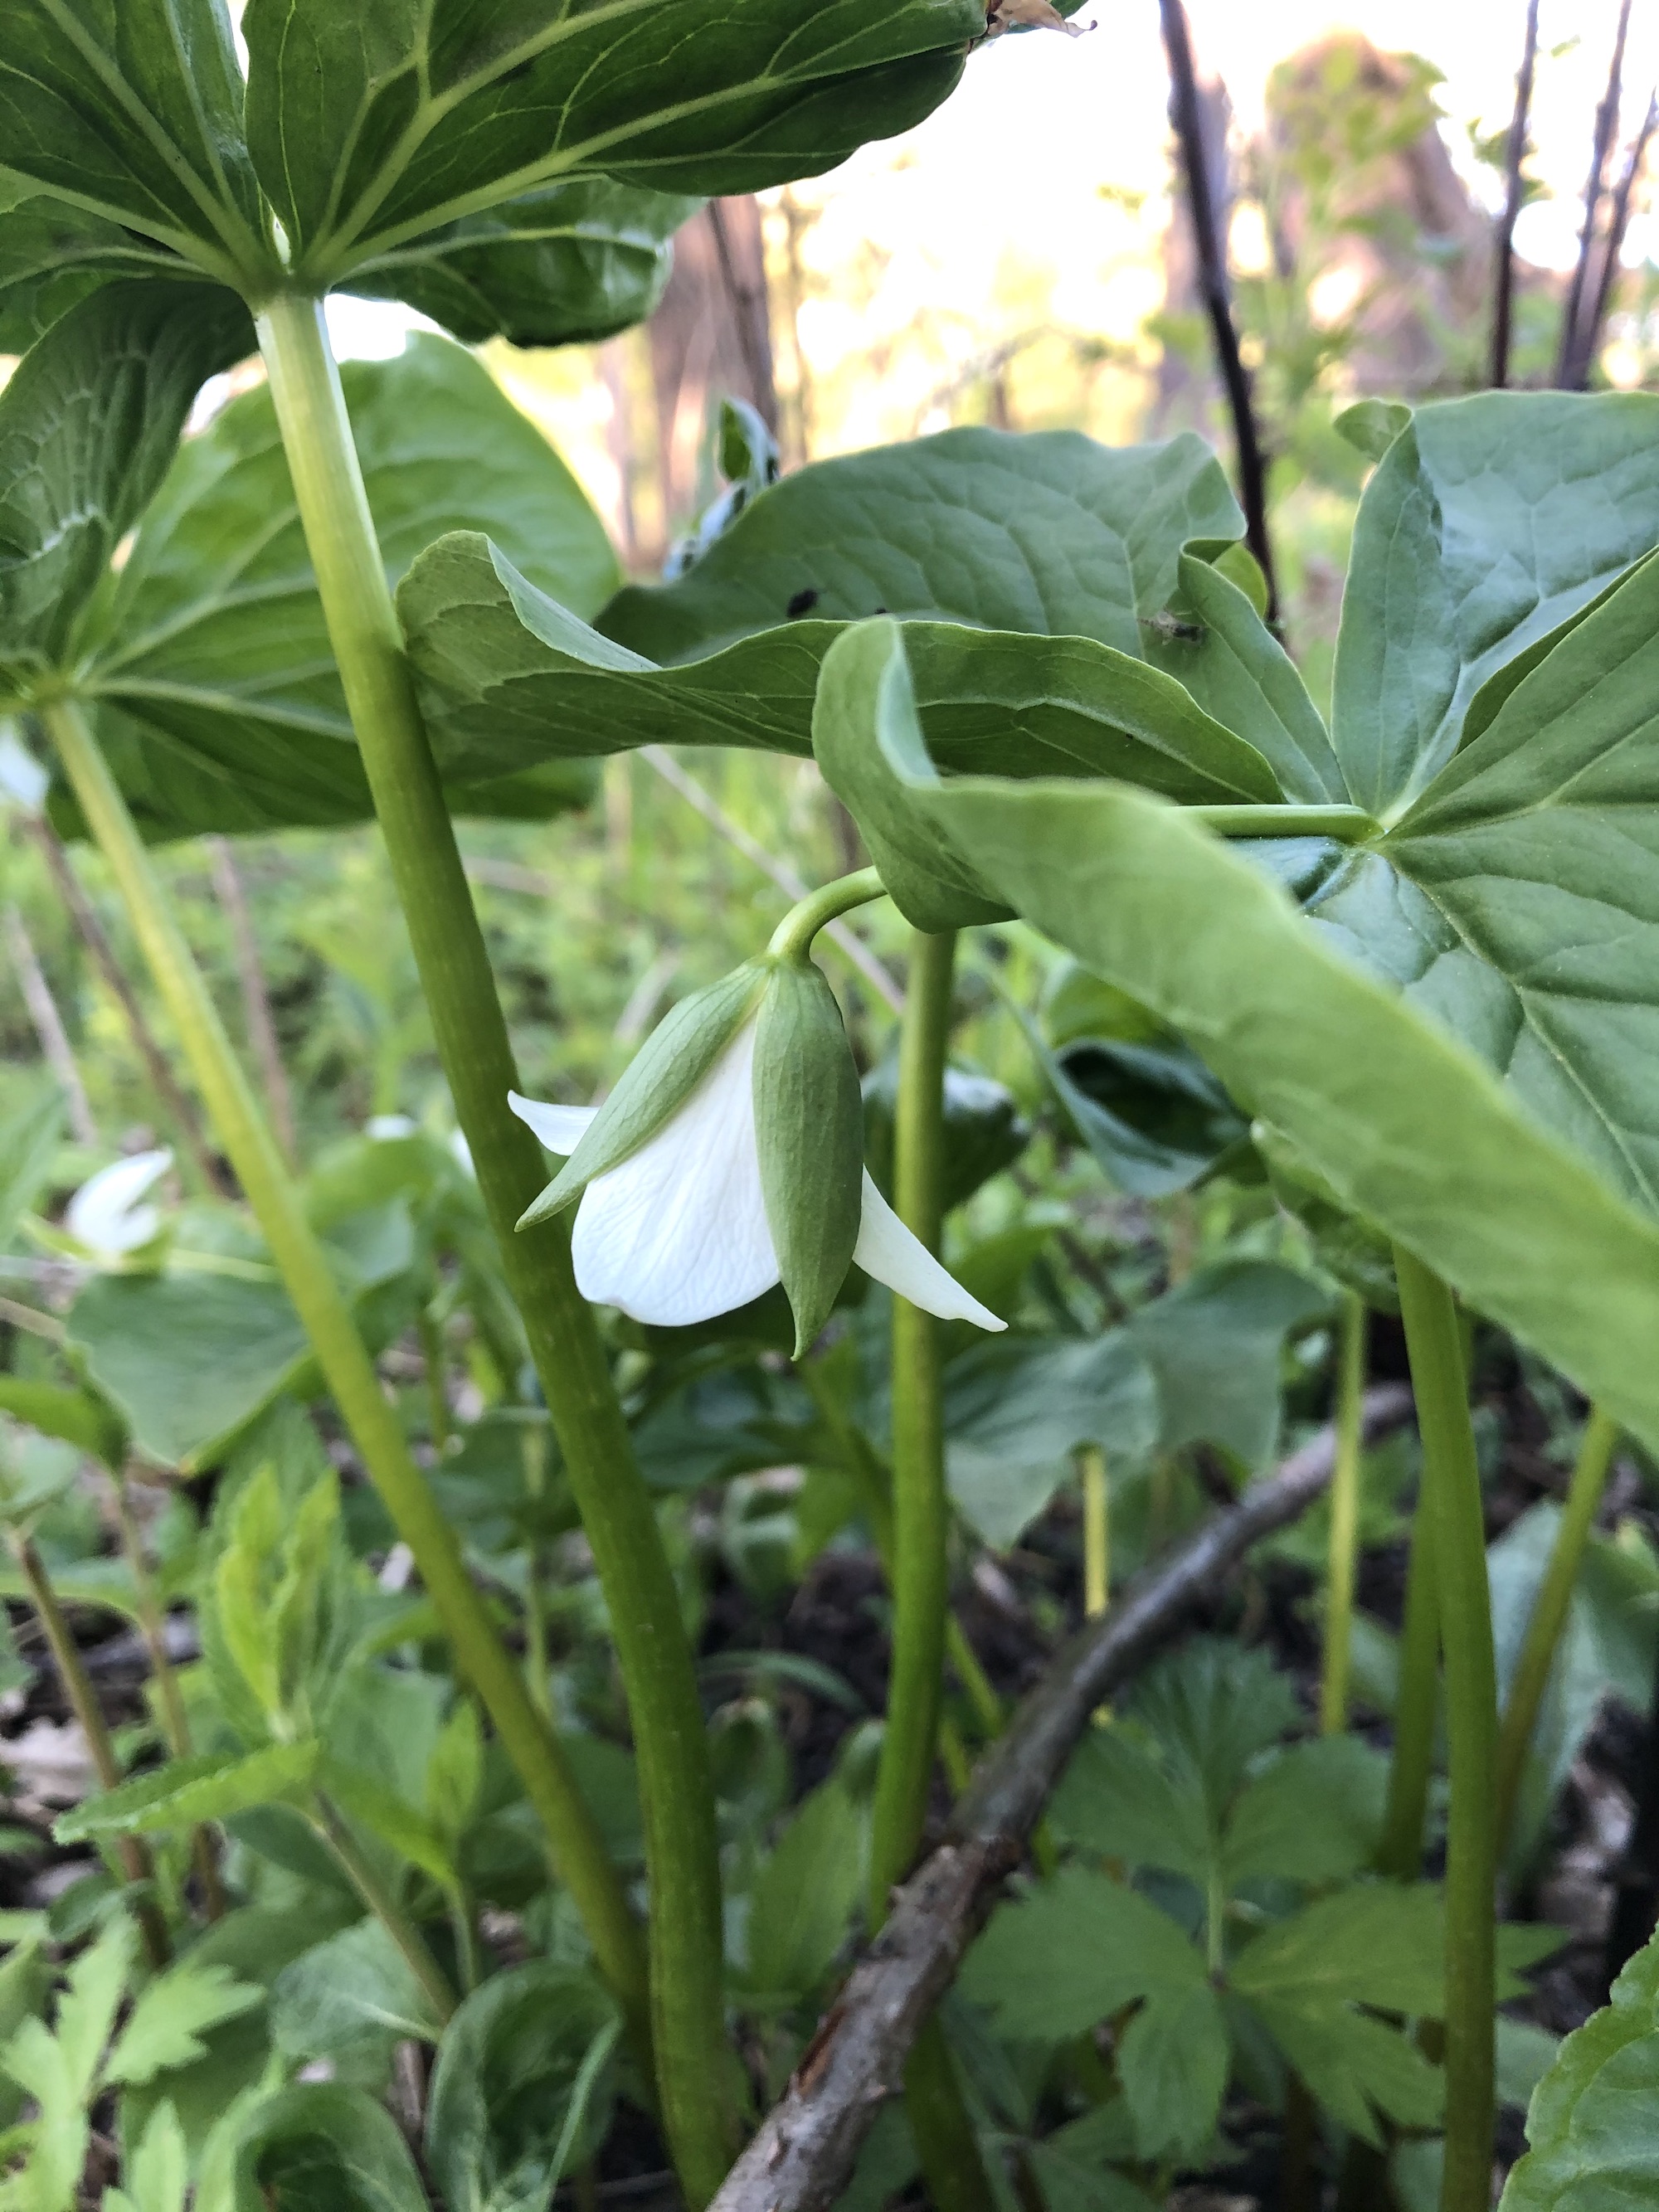 Drooping Trillium near Council Ring Spring in Madison, Wisconsin on May 12, 2021.